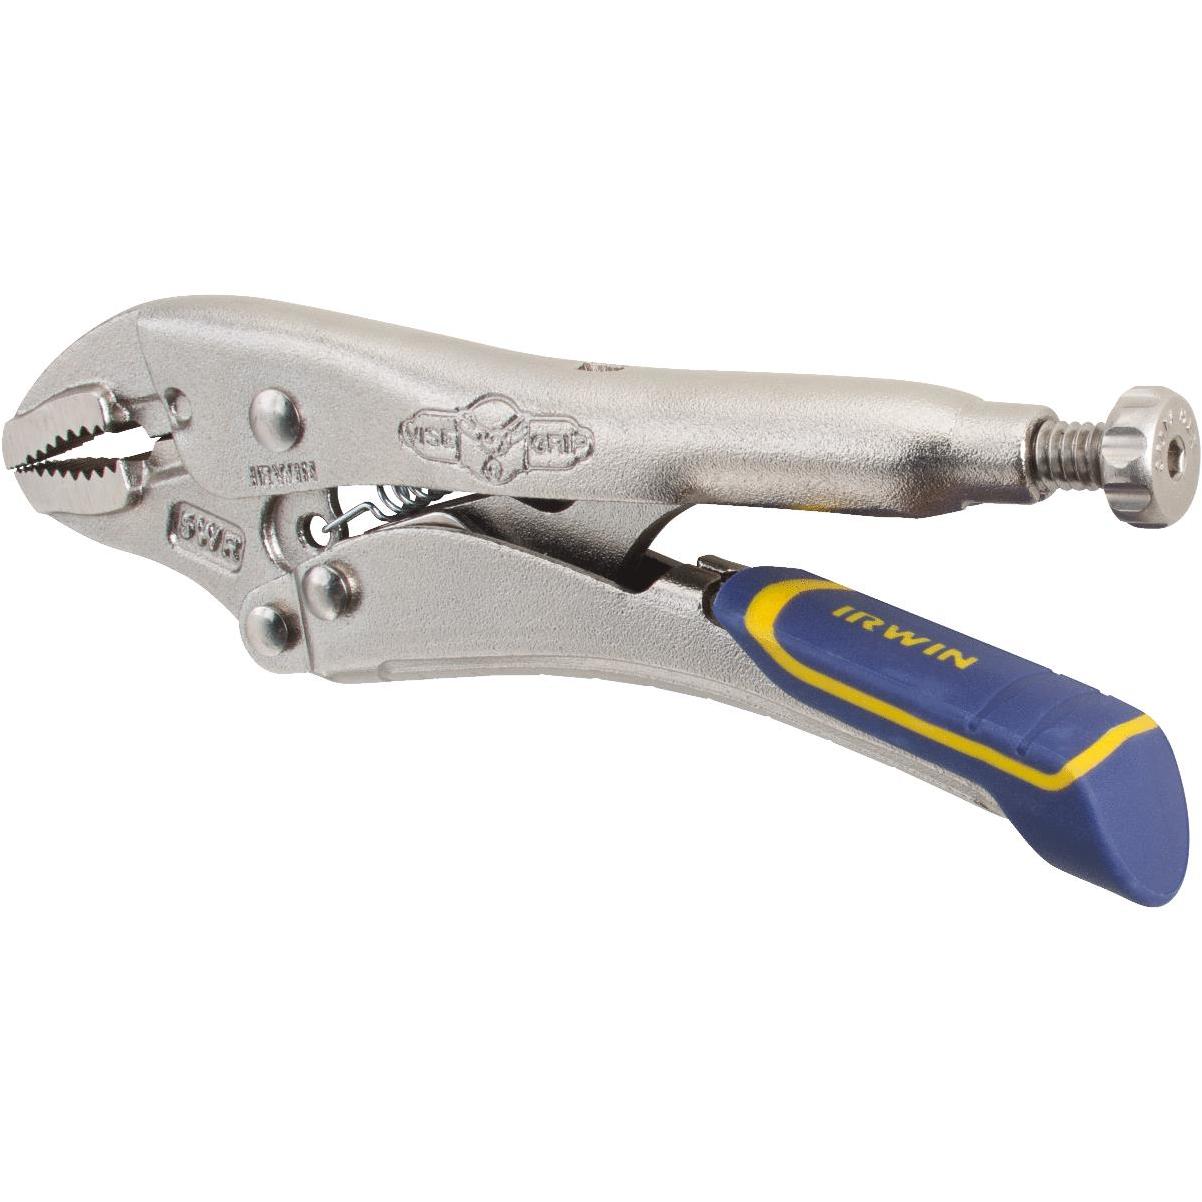 Irwin Vise-Grip The Original 7 In. Curved Jaw Locking Pliers with